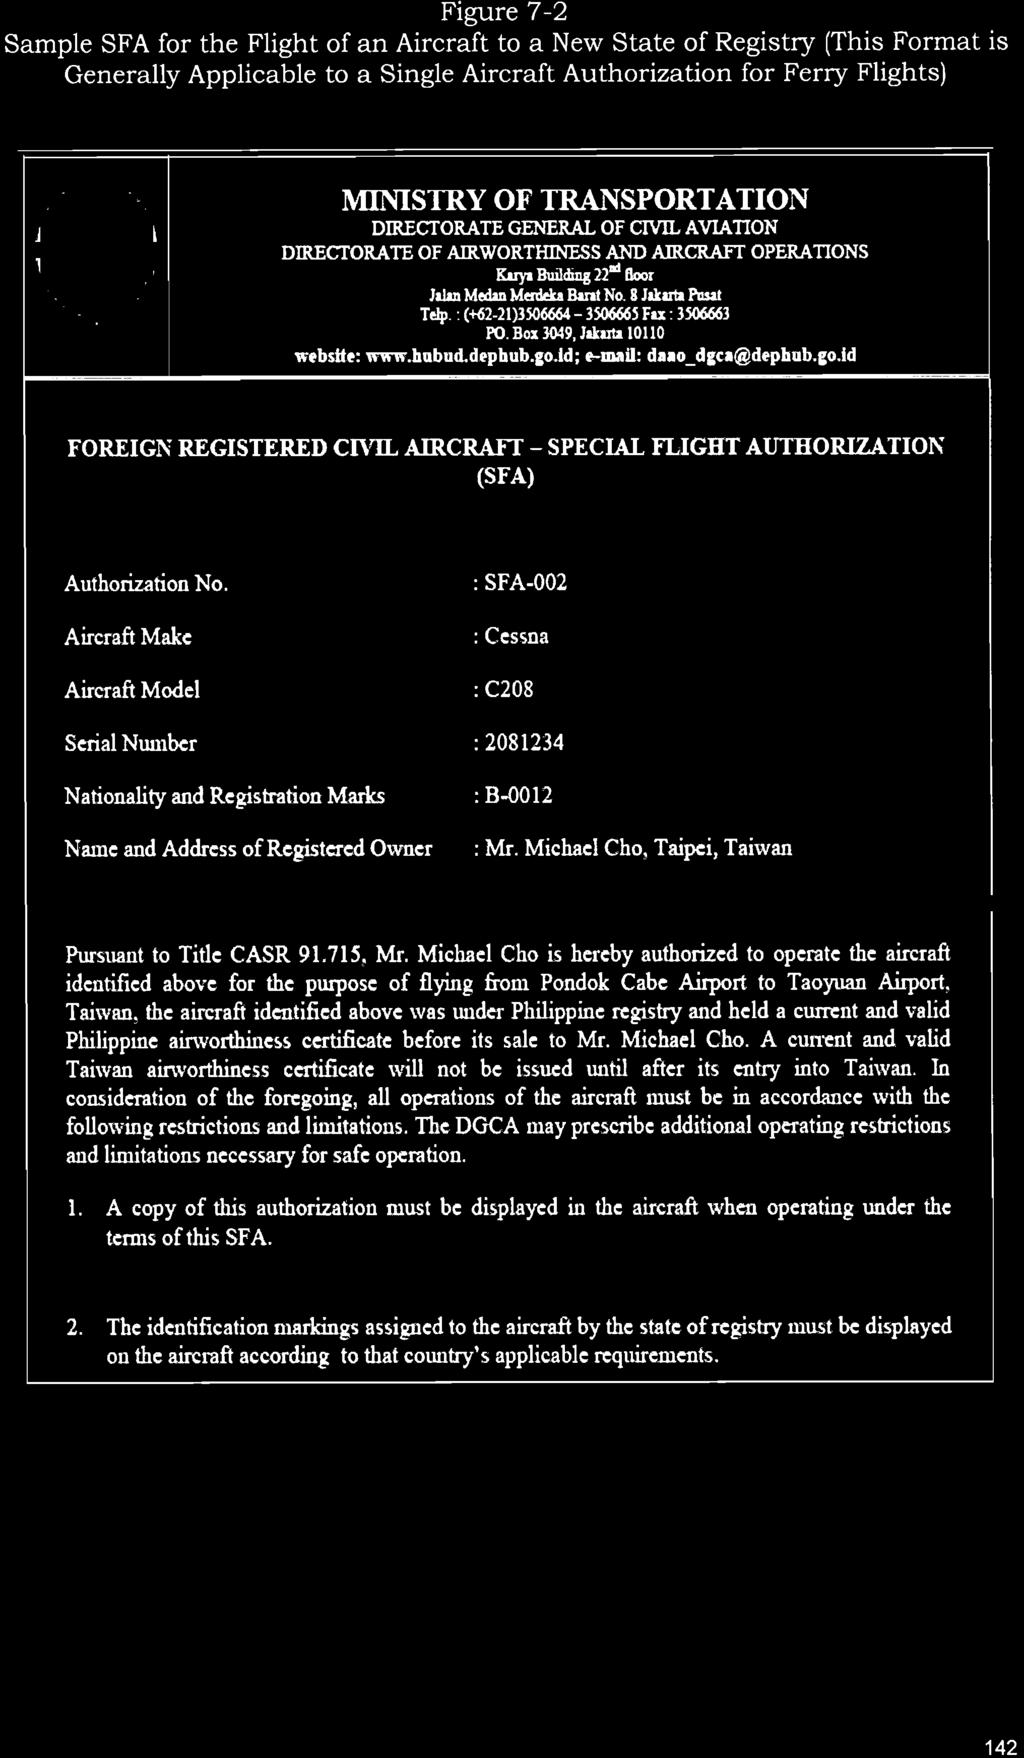 Figure 7-2 Sample SFA for the Flight of an Aircraft to a New State of Registry (This Format is Generally Applicable to a Single Aircraft Authorization for Ferry Flights) MINISTRY OF TRANSPORTATION